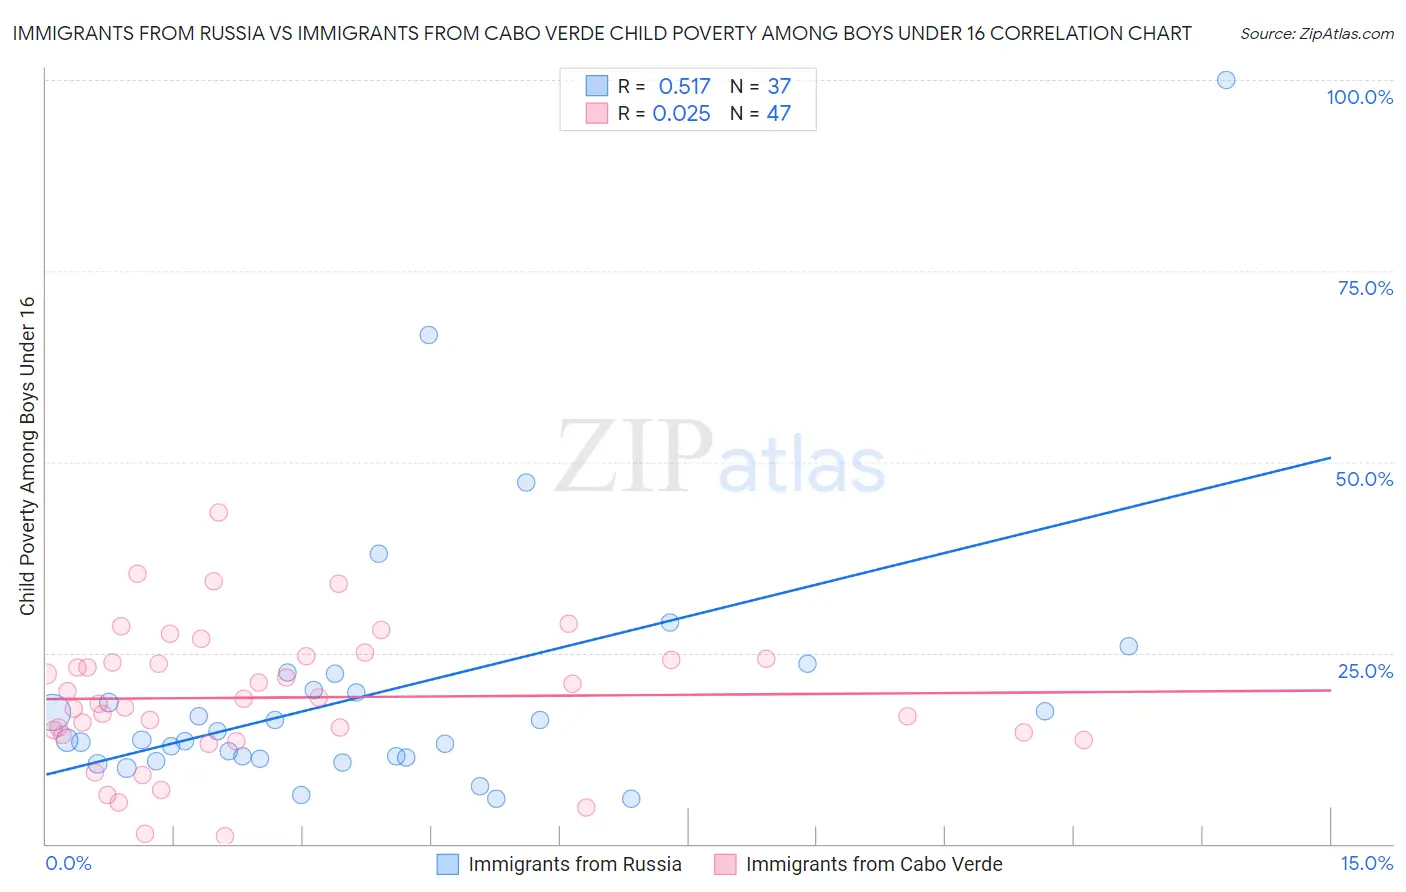 Immigrants from Russia vs Immigrants from Cabo Verde Child Poverty Among Boys Under 16